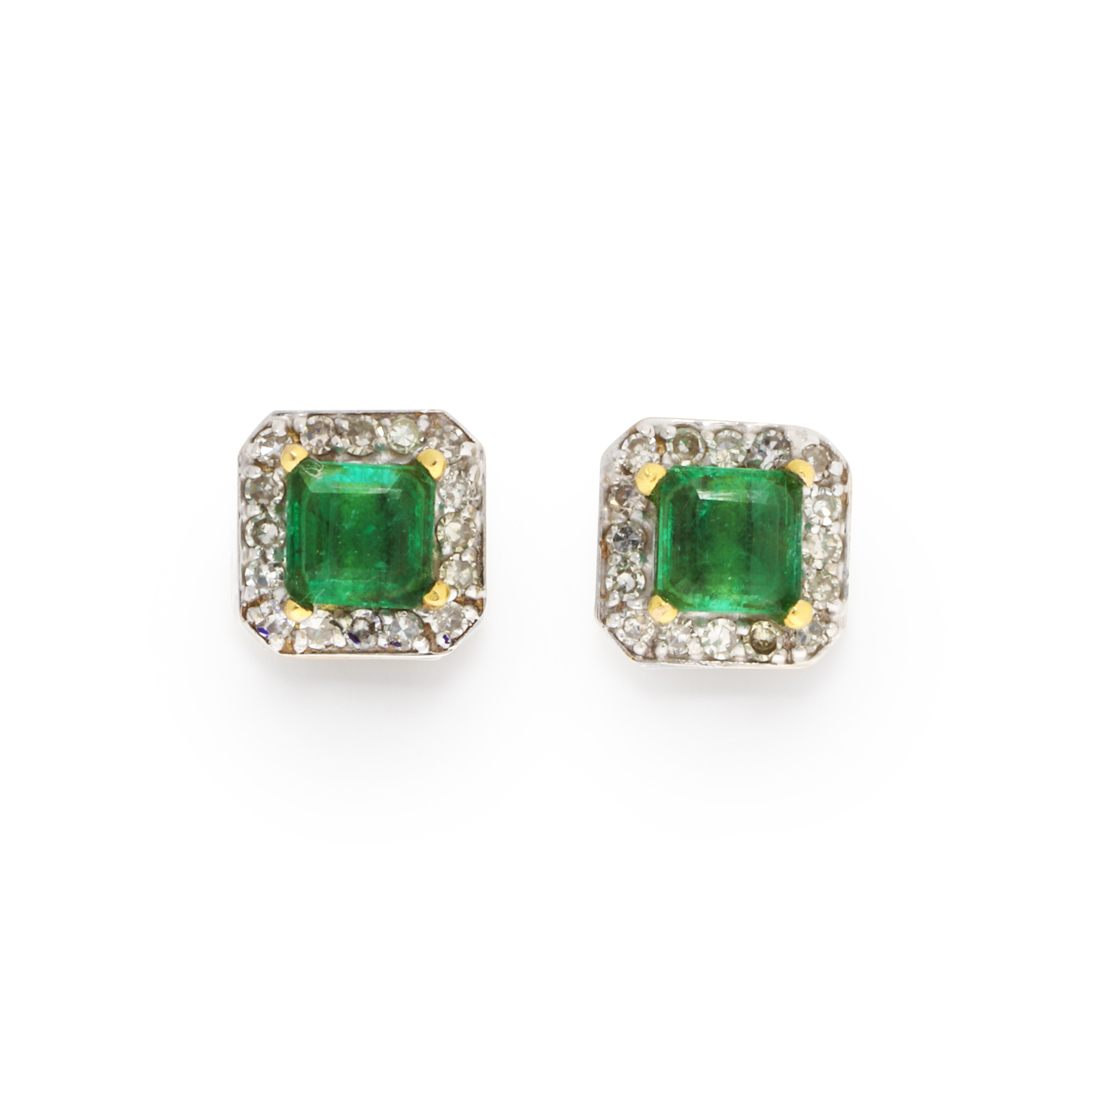 A PAIR OF EMERALD DIAMOND AND 3a2ad7